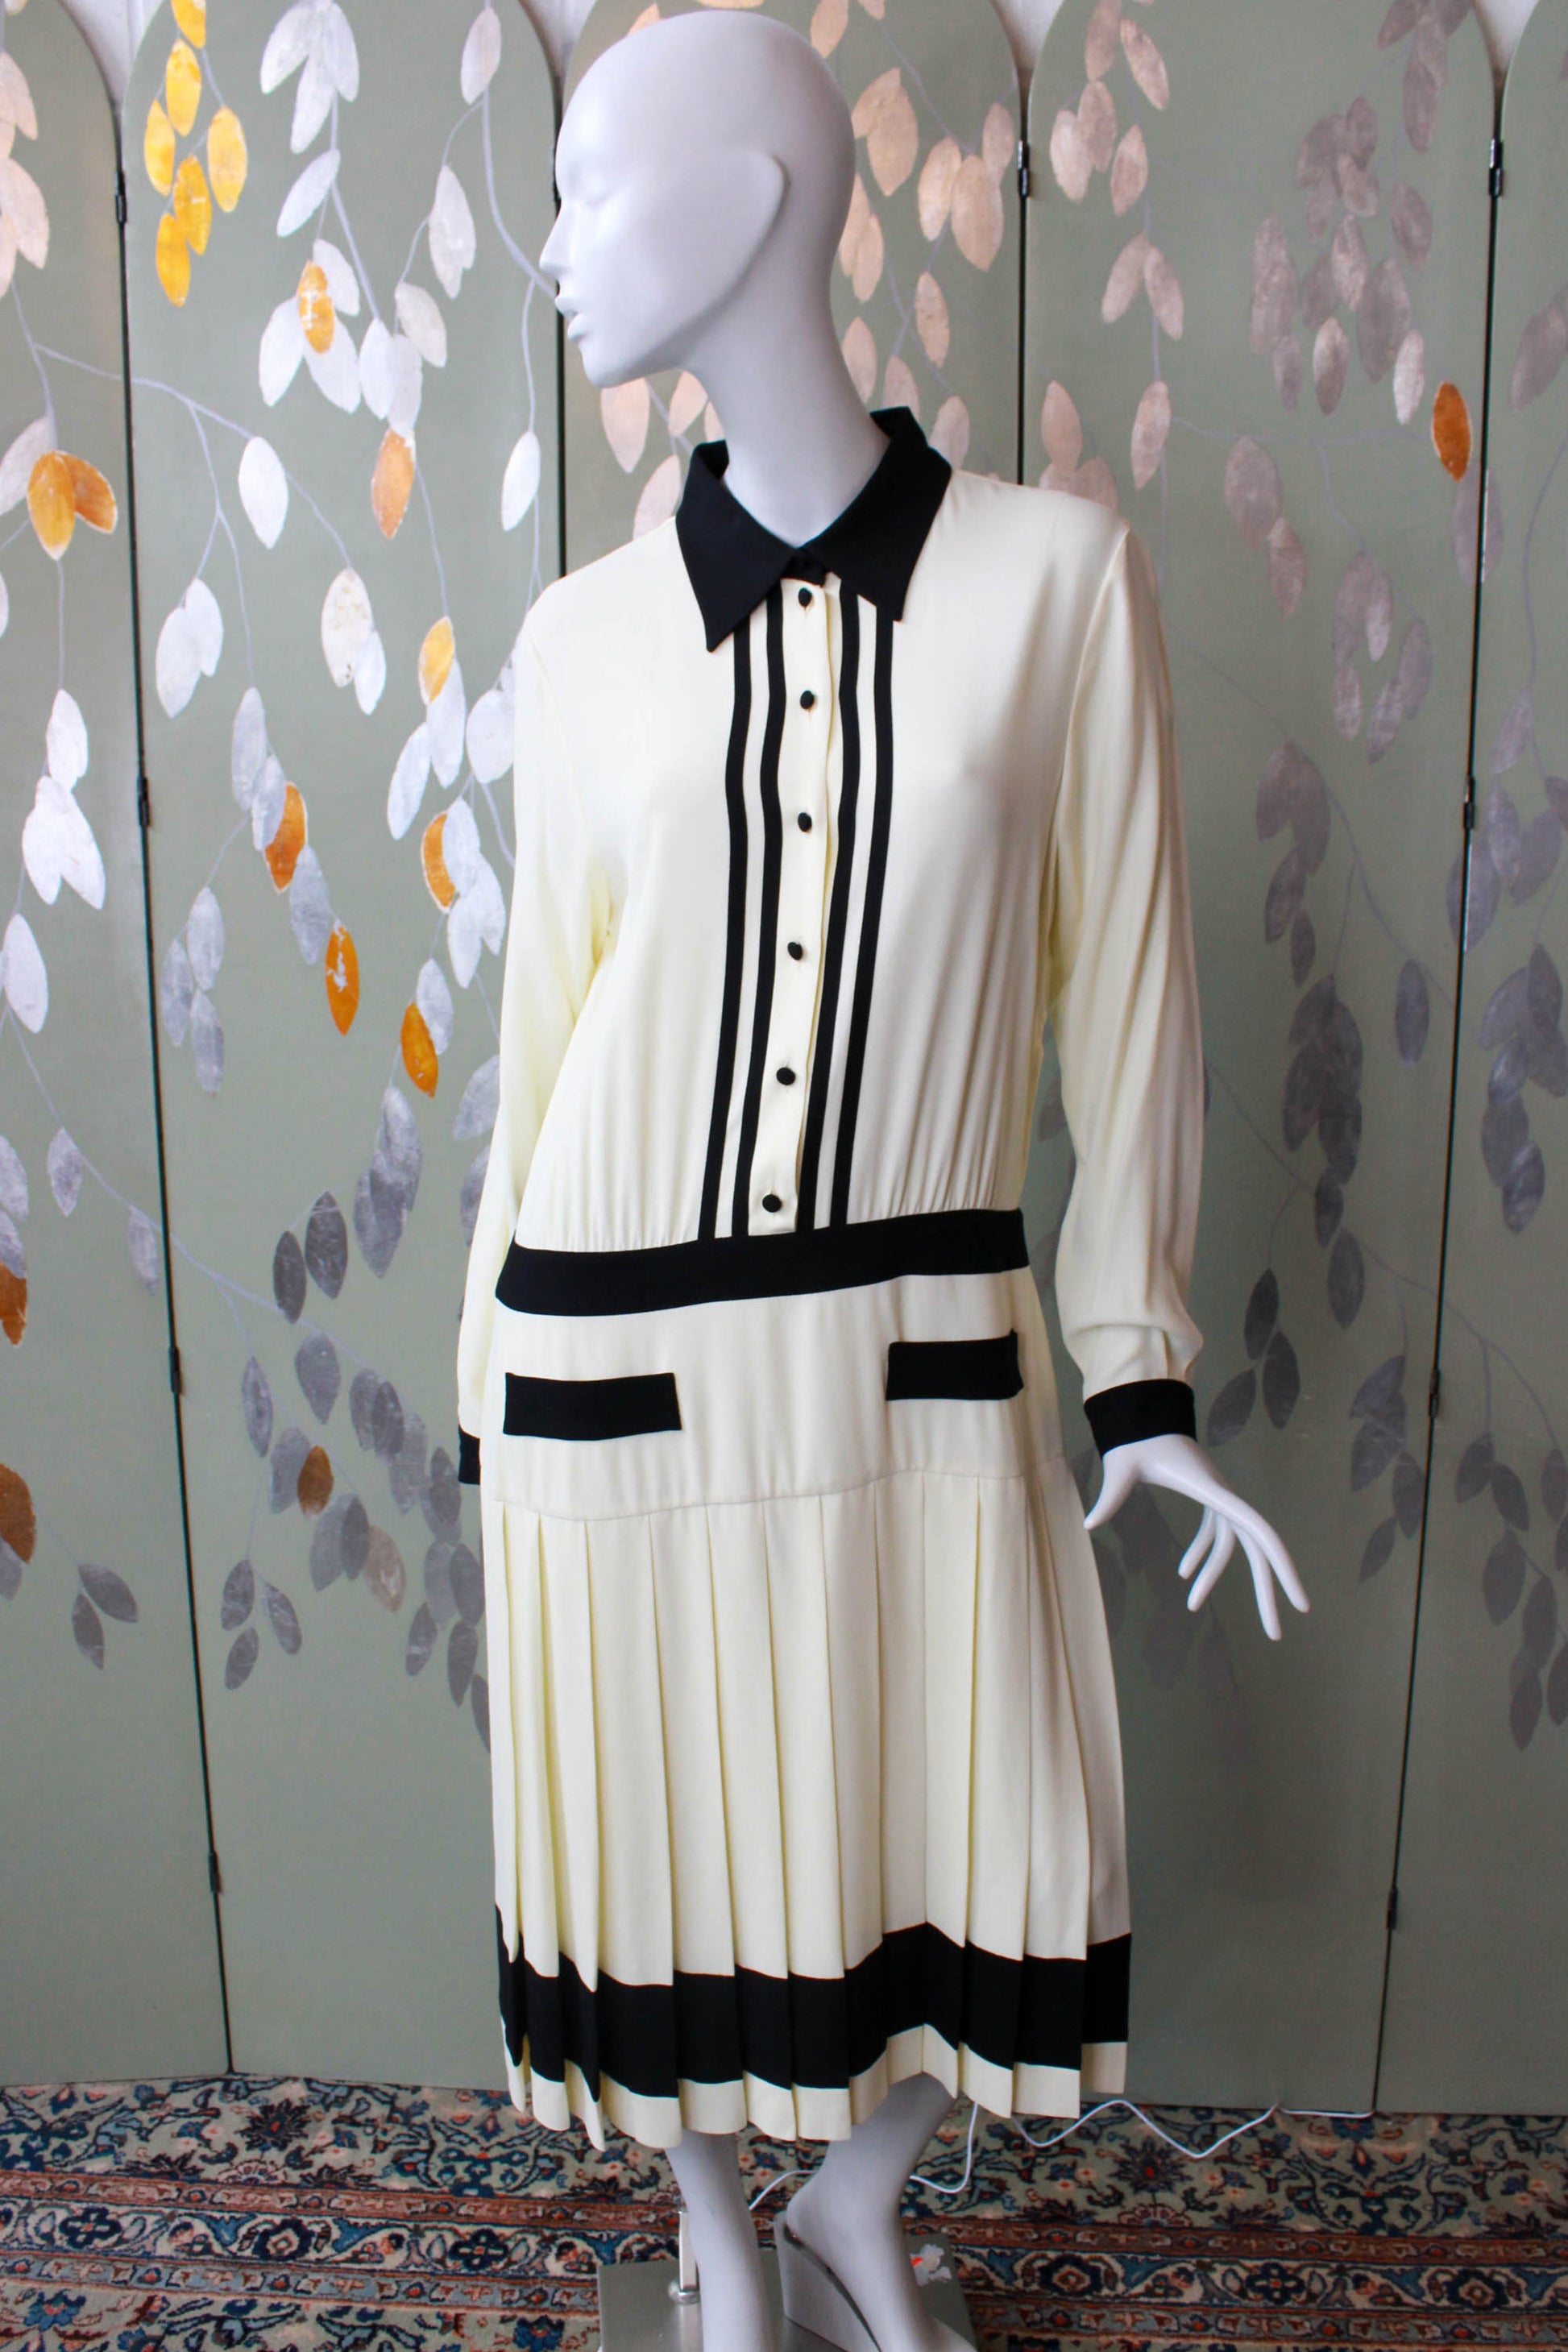 y2k Moschino 1920s style drop waist shirt dress, button up with collar, cream with black contrast bands at waist, pockets, hem, cuffs collar. Pleated skirt, faux pockets